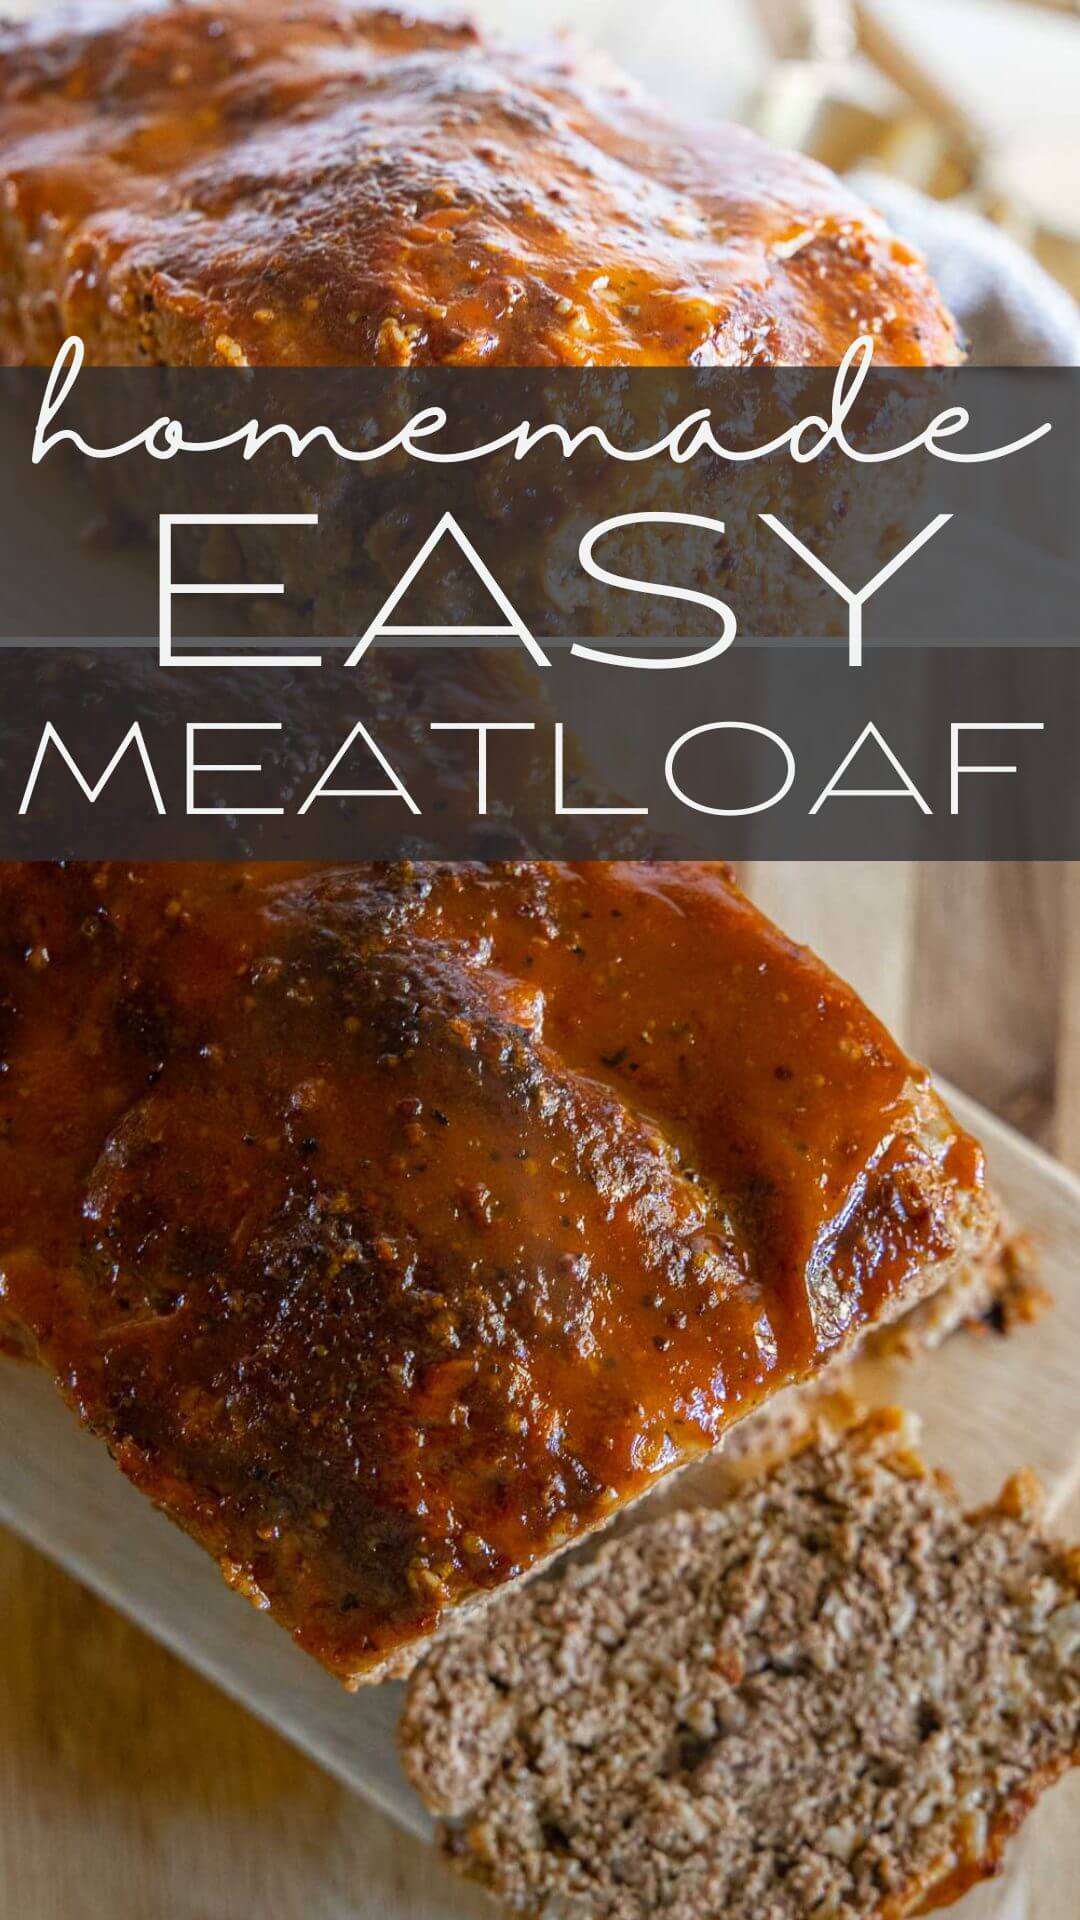 This easy meatloaf recipe is the perfect weeknight meal! This is a gluten free meatloaf recipe as well, full of flavor and so comforting. Using Quaker oats and other simple ingredients you can easily make this any night of the week.